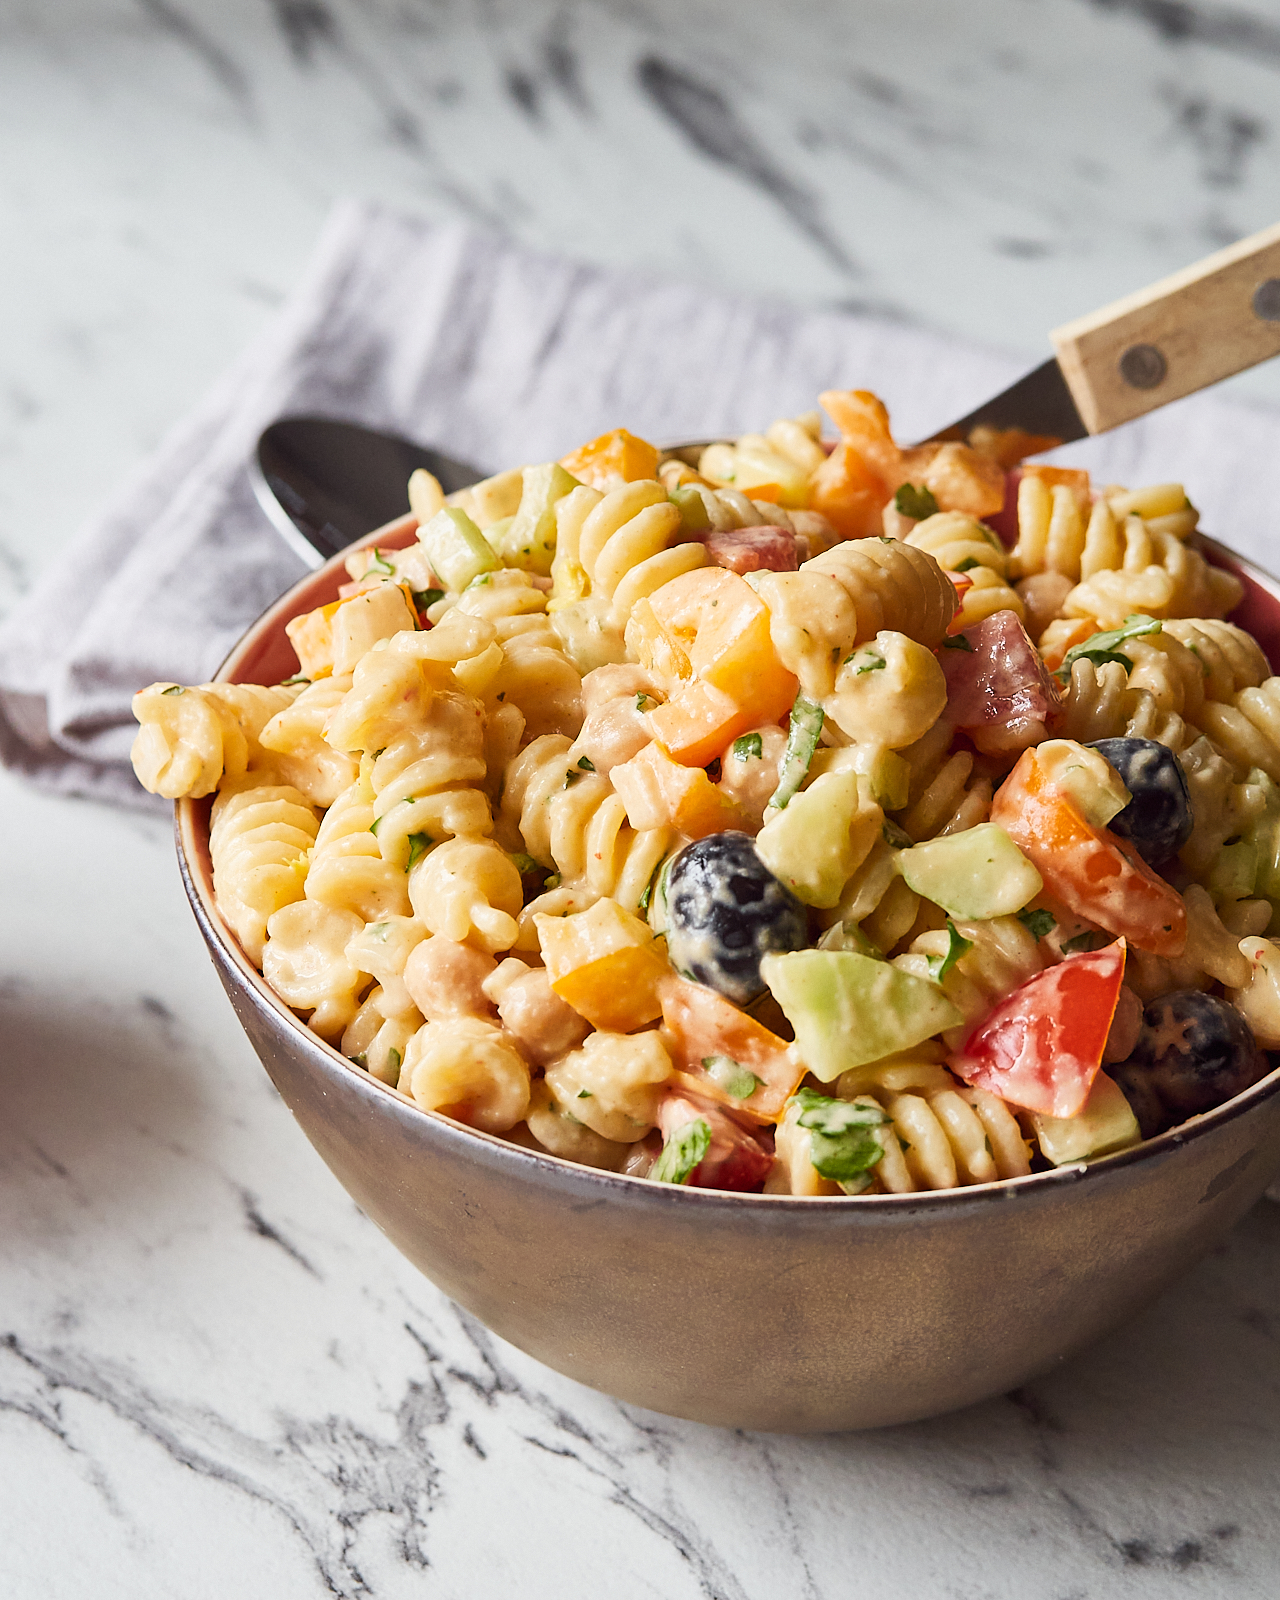 Pasta Salad with Ranch Dressing Recipe